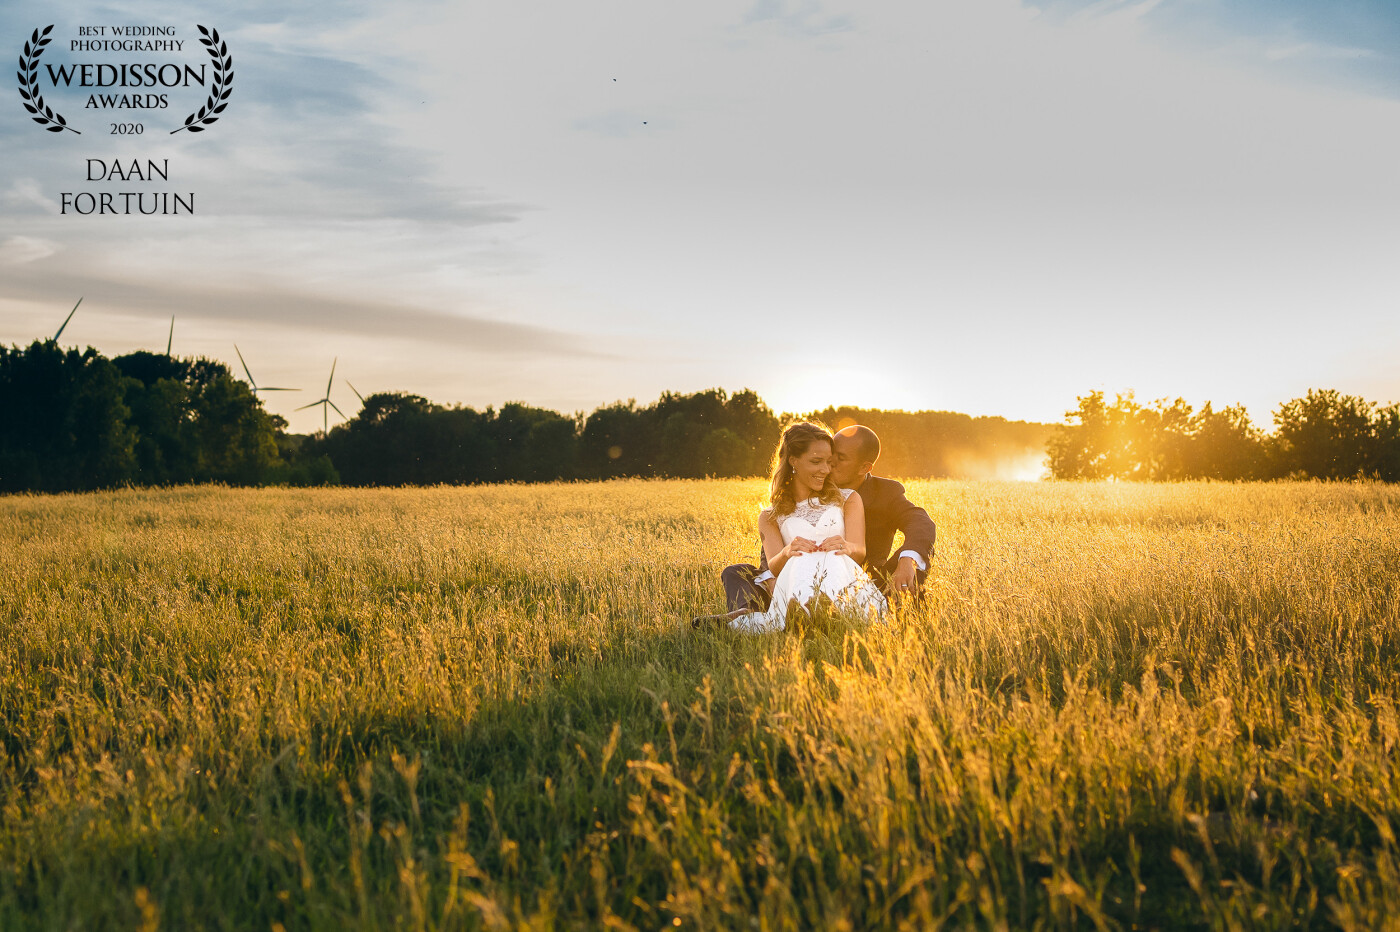 Many bridal couples have had to change their beloved date through covid-19. On their previously planned wedding day, we plan pre-wedding Shoots to do something special with the date. With these amazing couples we make these beautiful memories...2021 we are coming!